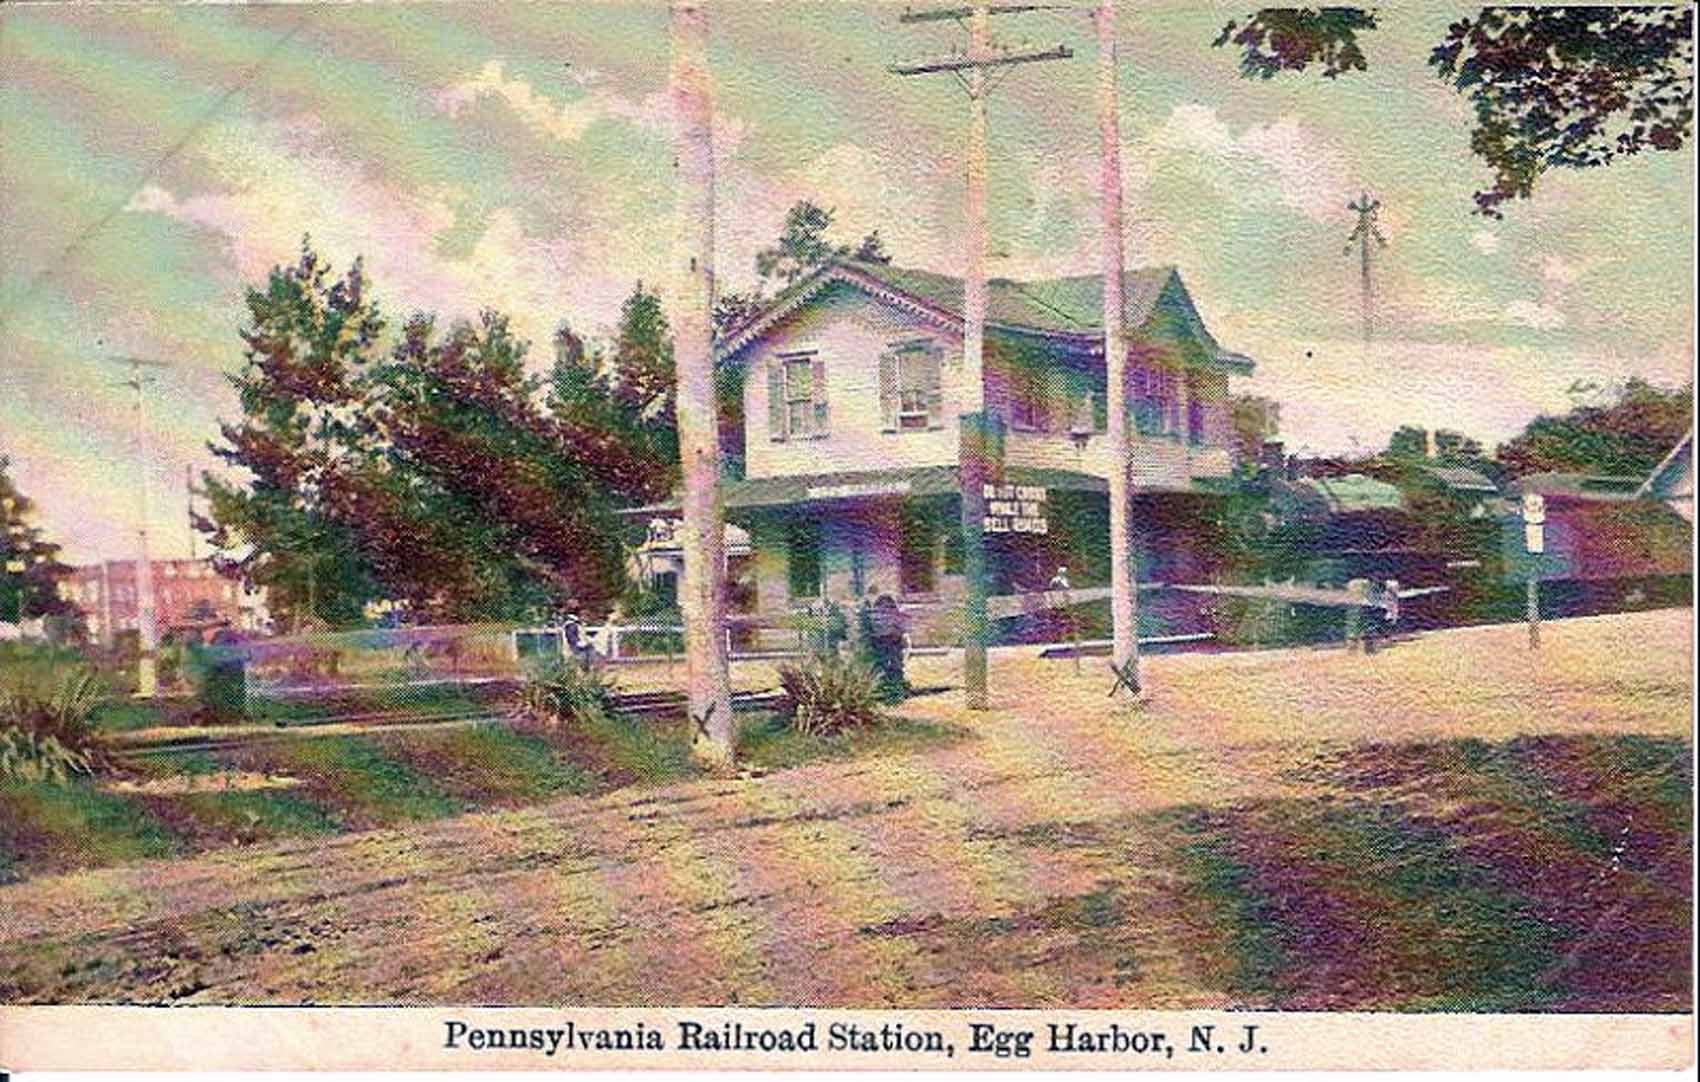 Egg Harbor City - The RR Station and a train - 1908